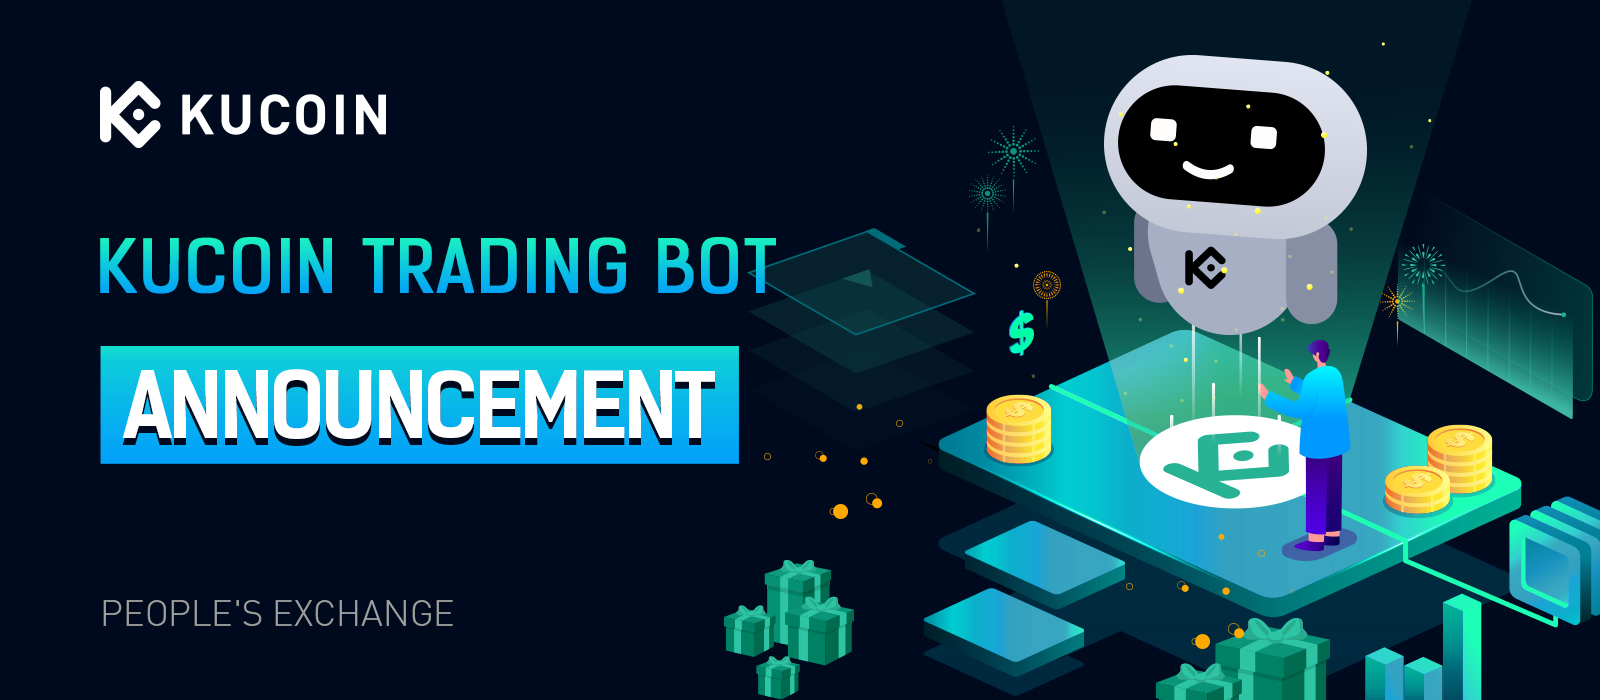 Mizar KuCoin Trading Bot and Copy Trading for Spot and Futures